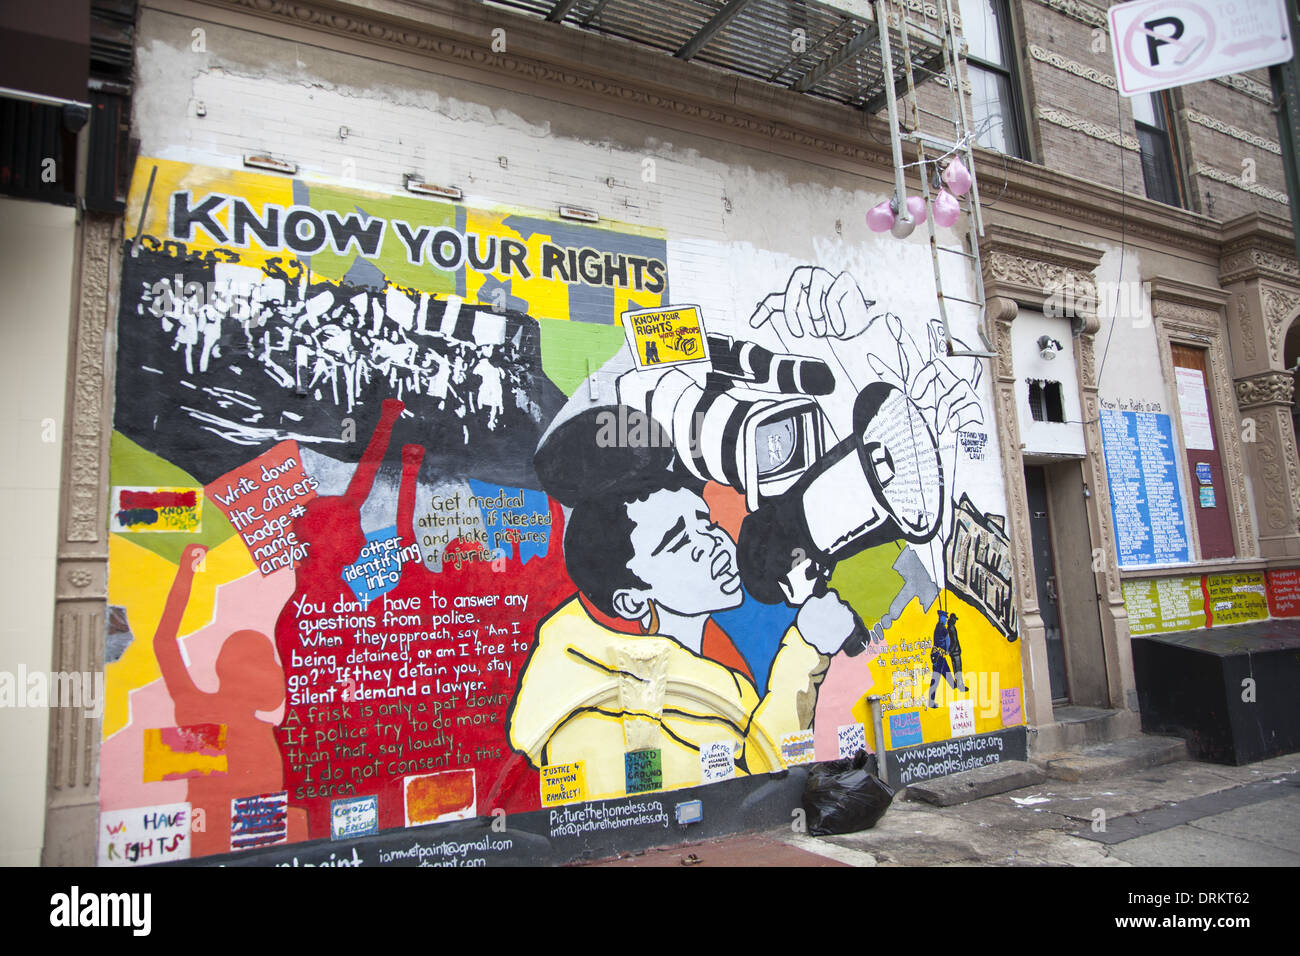 Know your rights mural on a building in Harlem educates people on their rights if stopped by police. Stock Photo